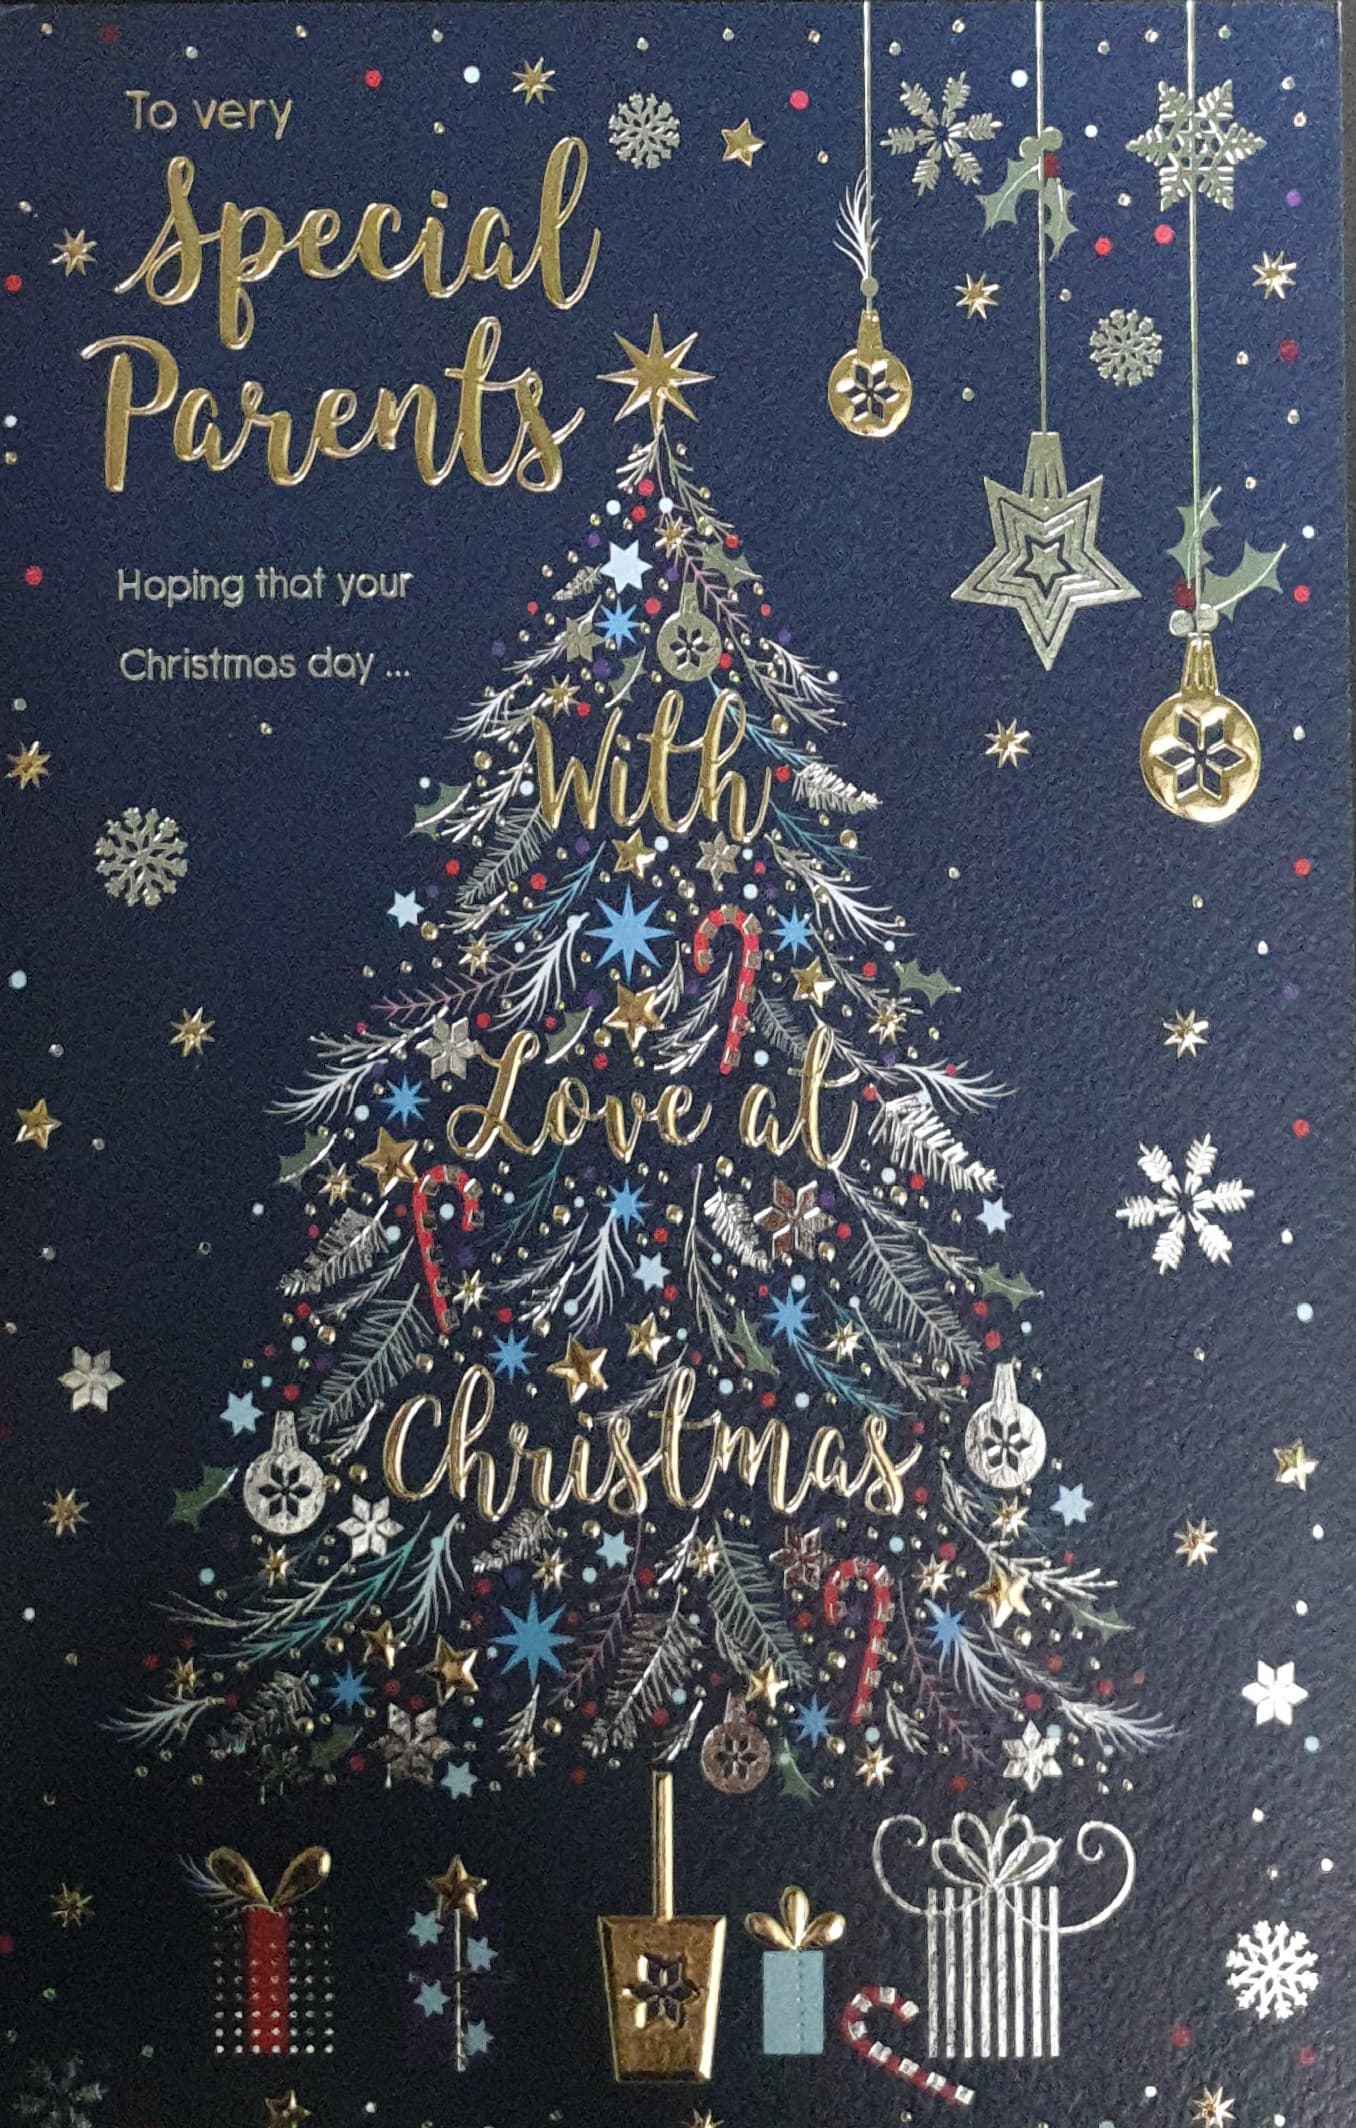 Special Parents Christmas Card - With Love At Christmas / Sparkly Tree